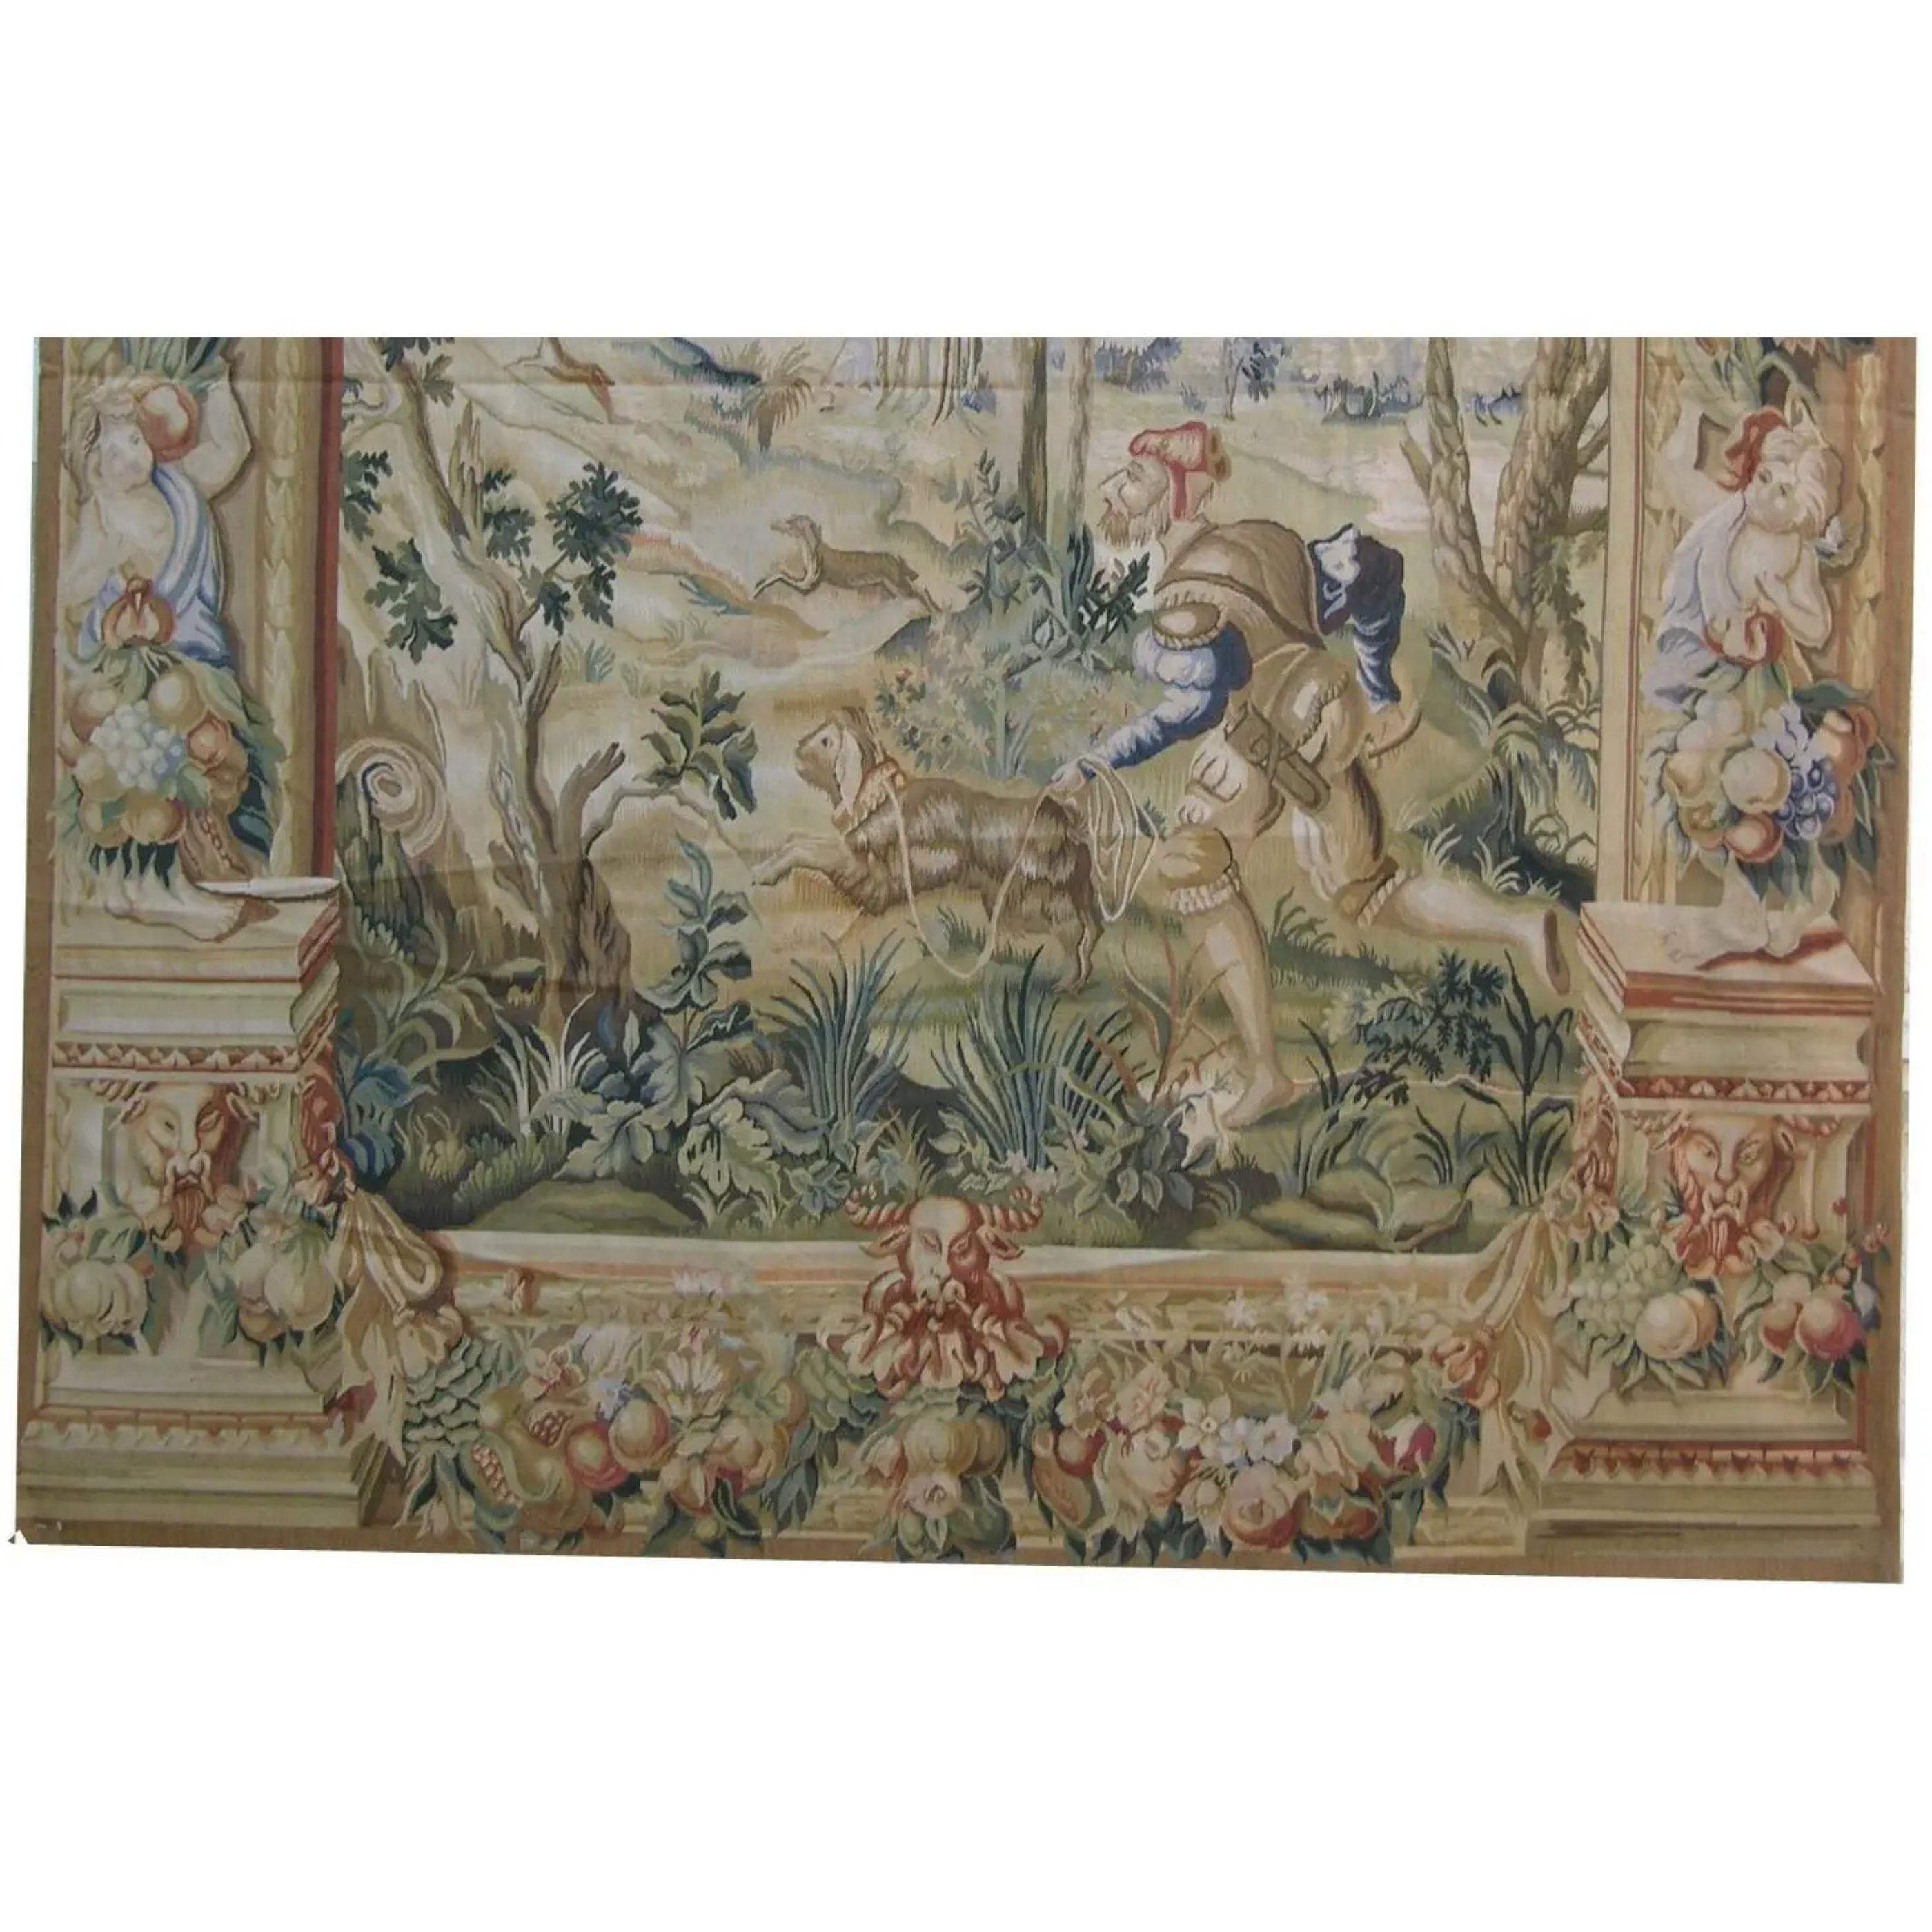 Unknown Vintage Tapestry Depicting a Hunt 6.8X5.3 For Sale